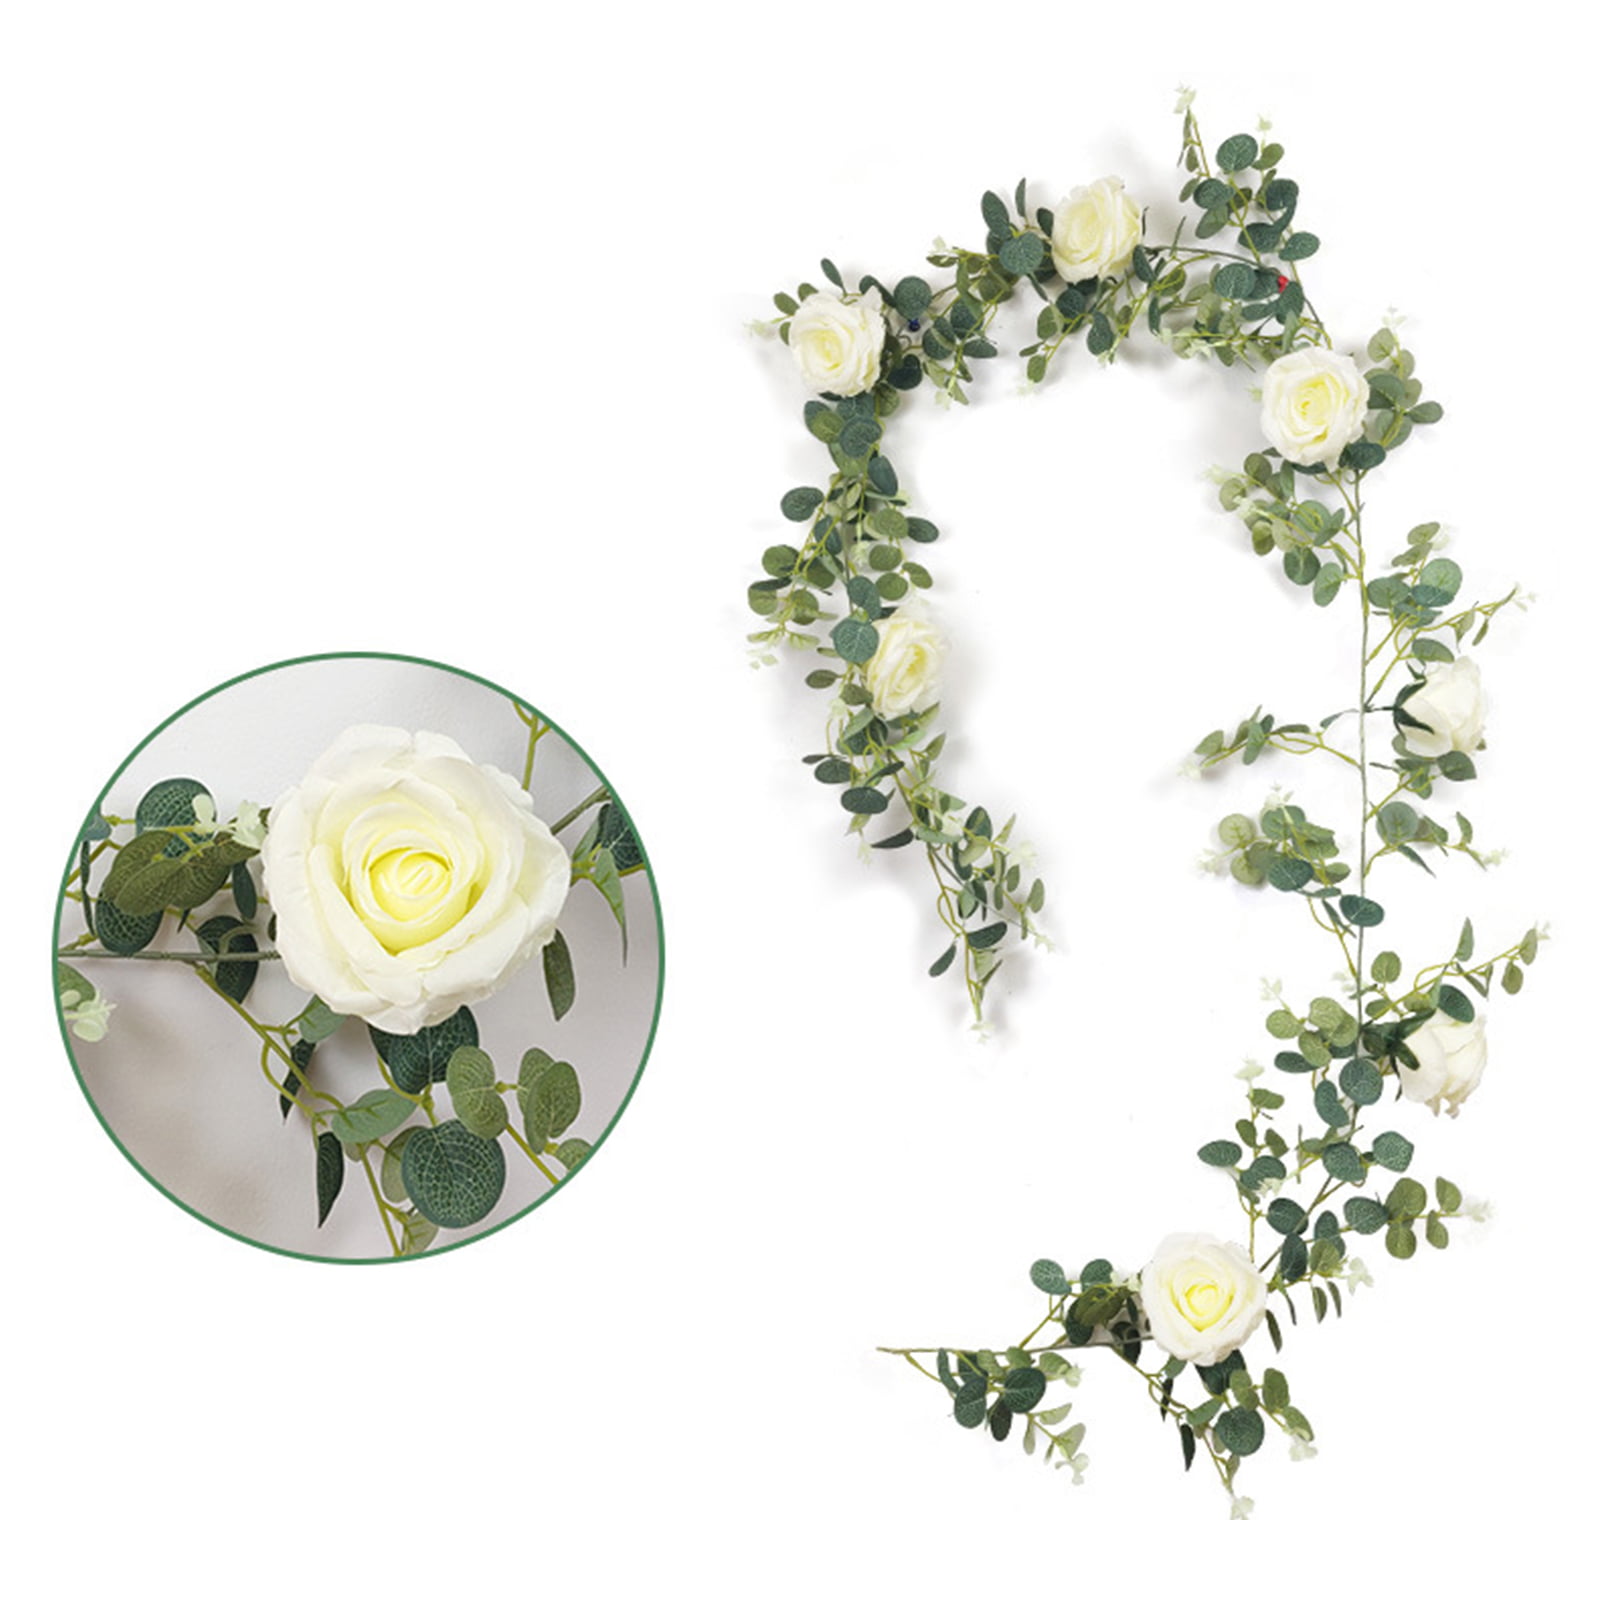 Details about   6.6Ft Artificial Rose Vine Fake Flower Hanging Eucalyptus Garland with Rose 